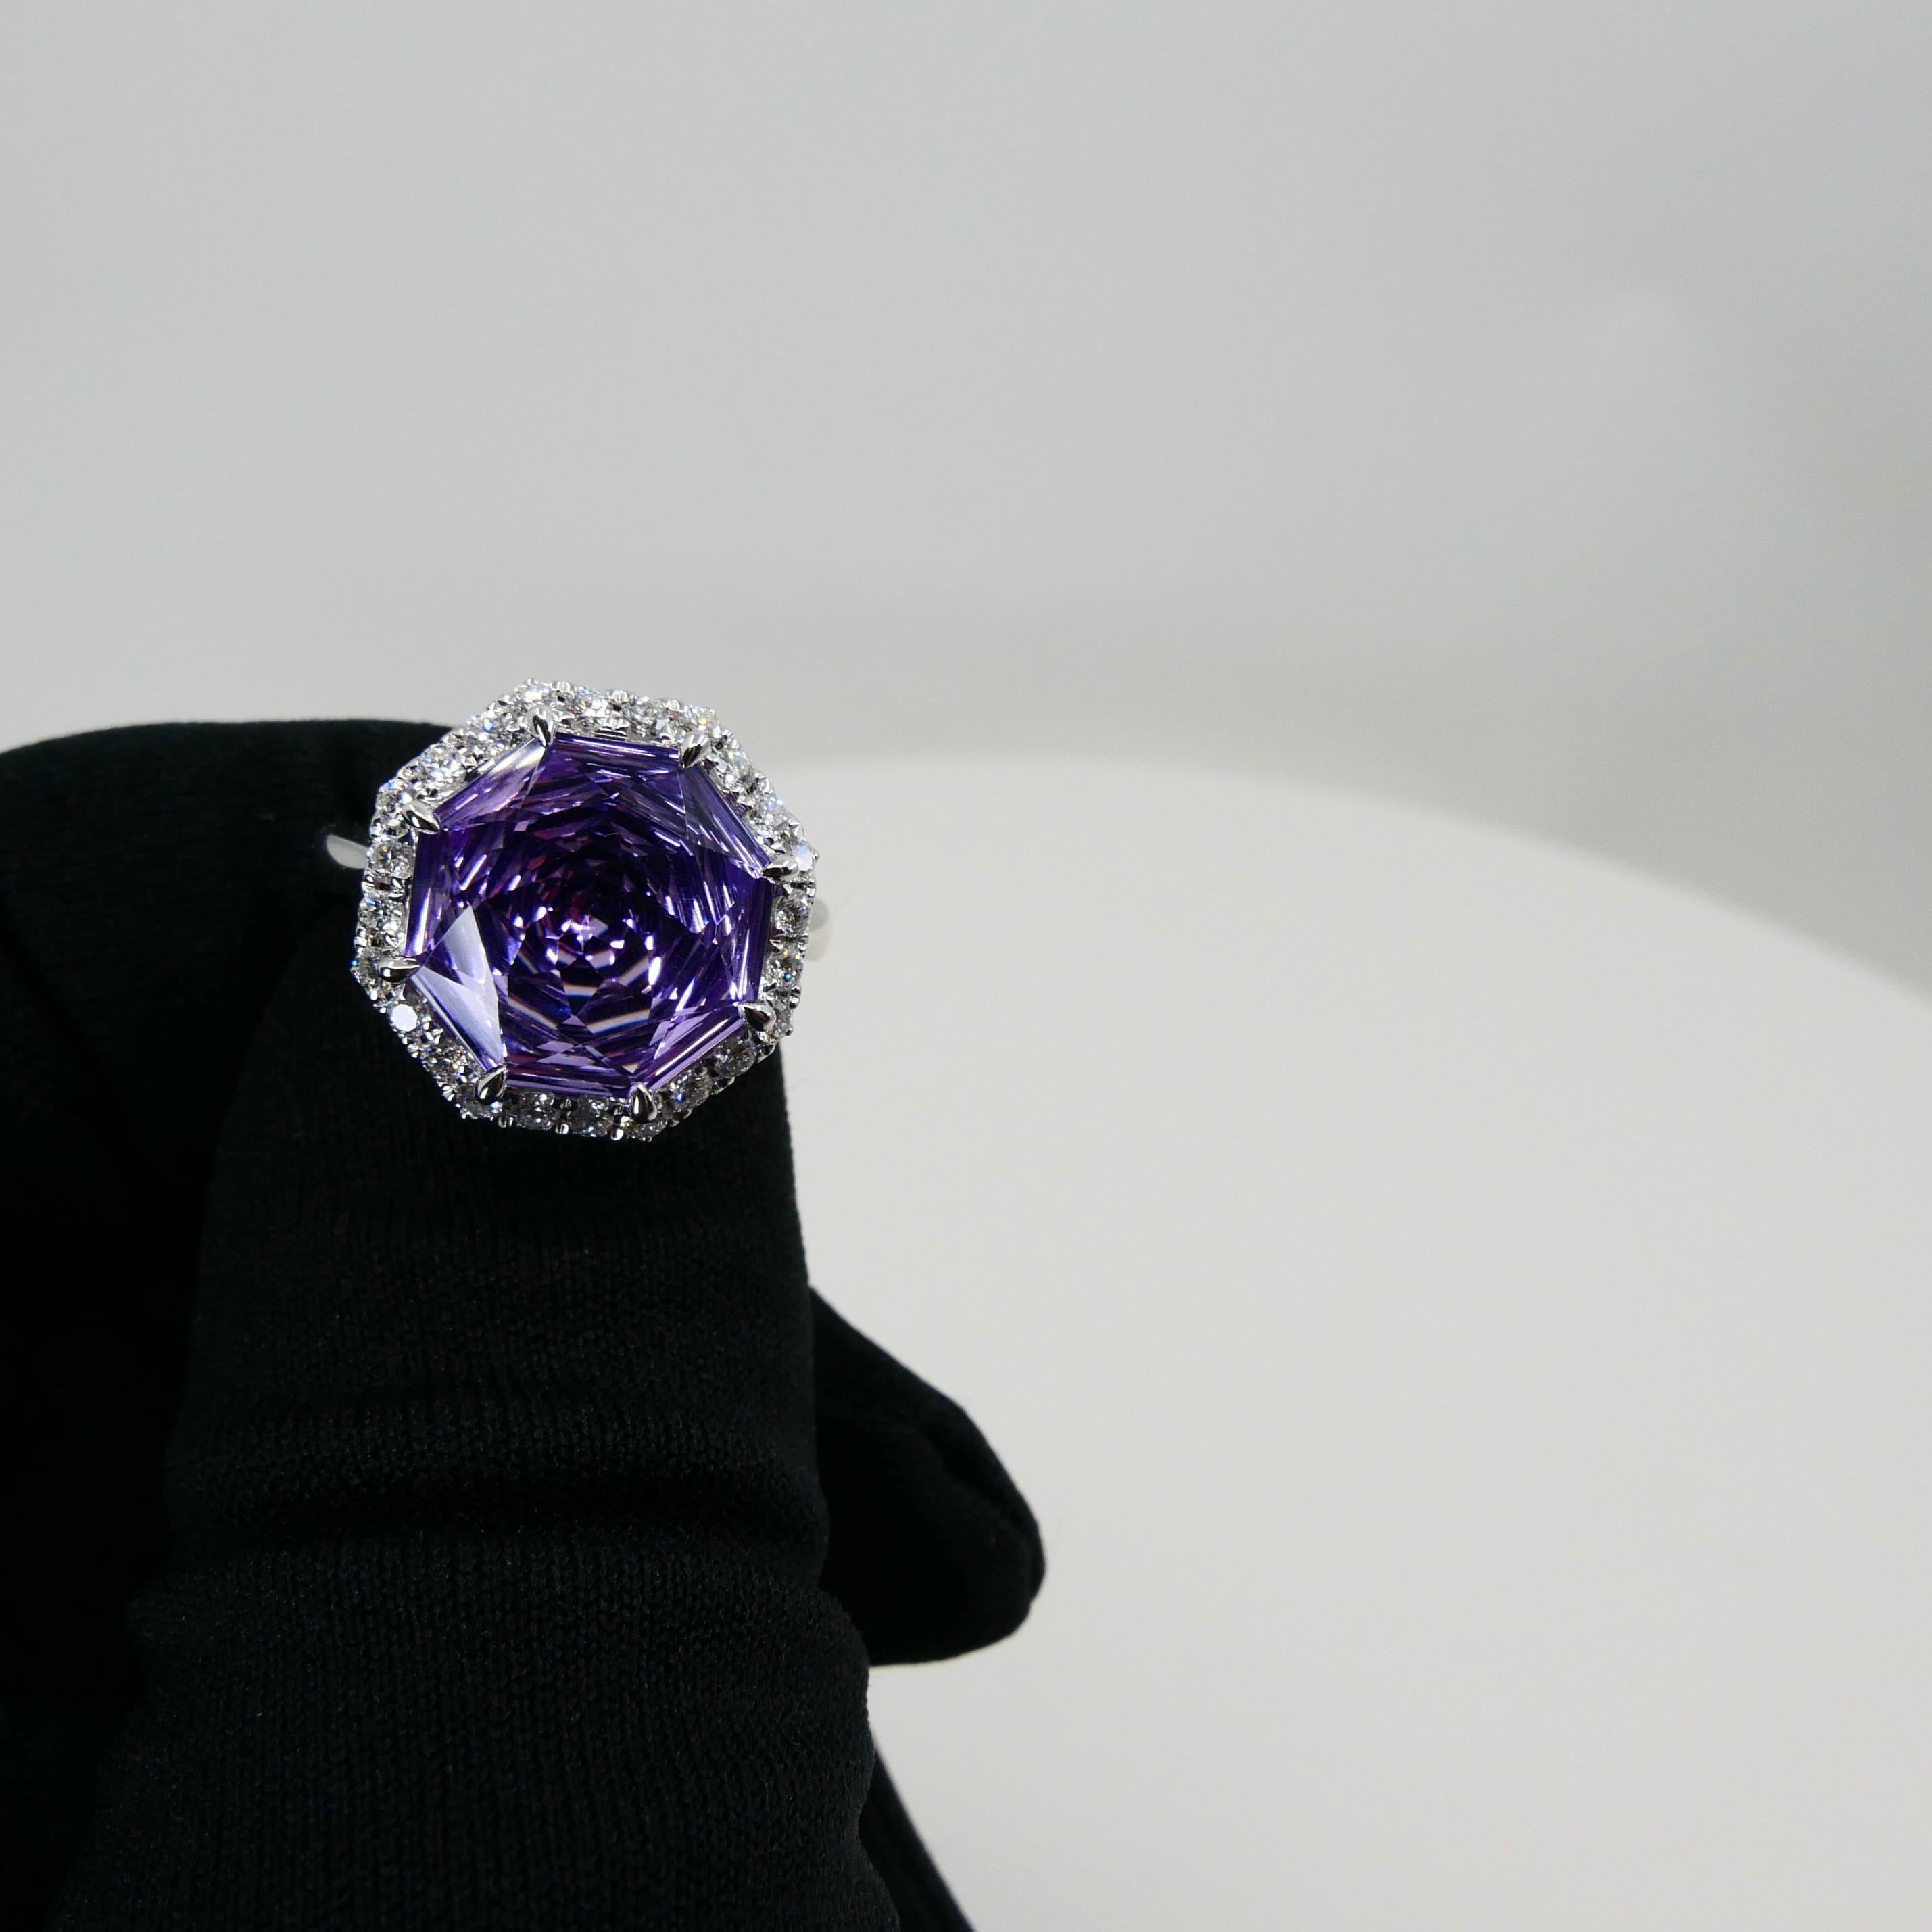 5.32 Carat Flower Cut Amethyst and Diamond Cocktail Ring, Statement Ring 2